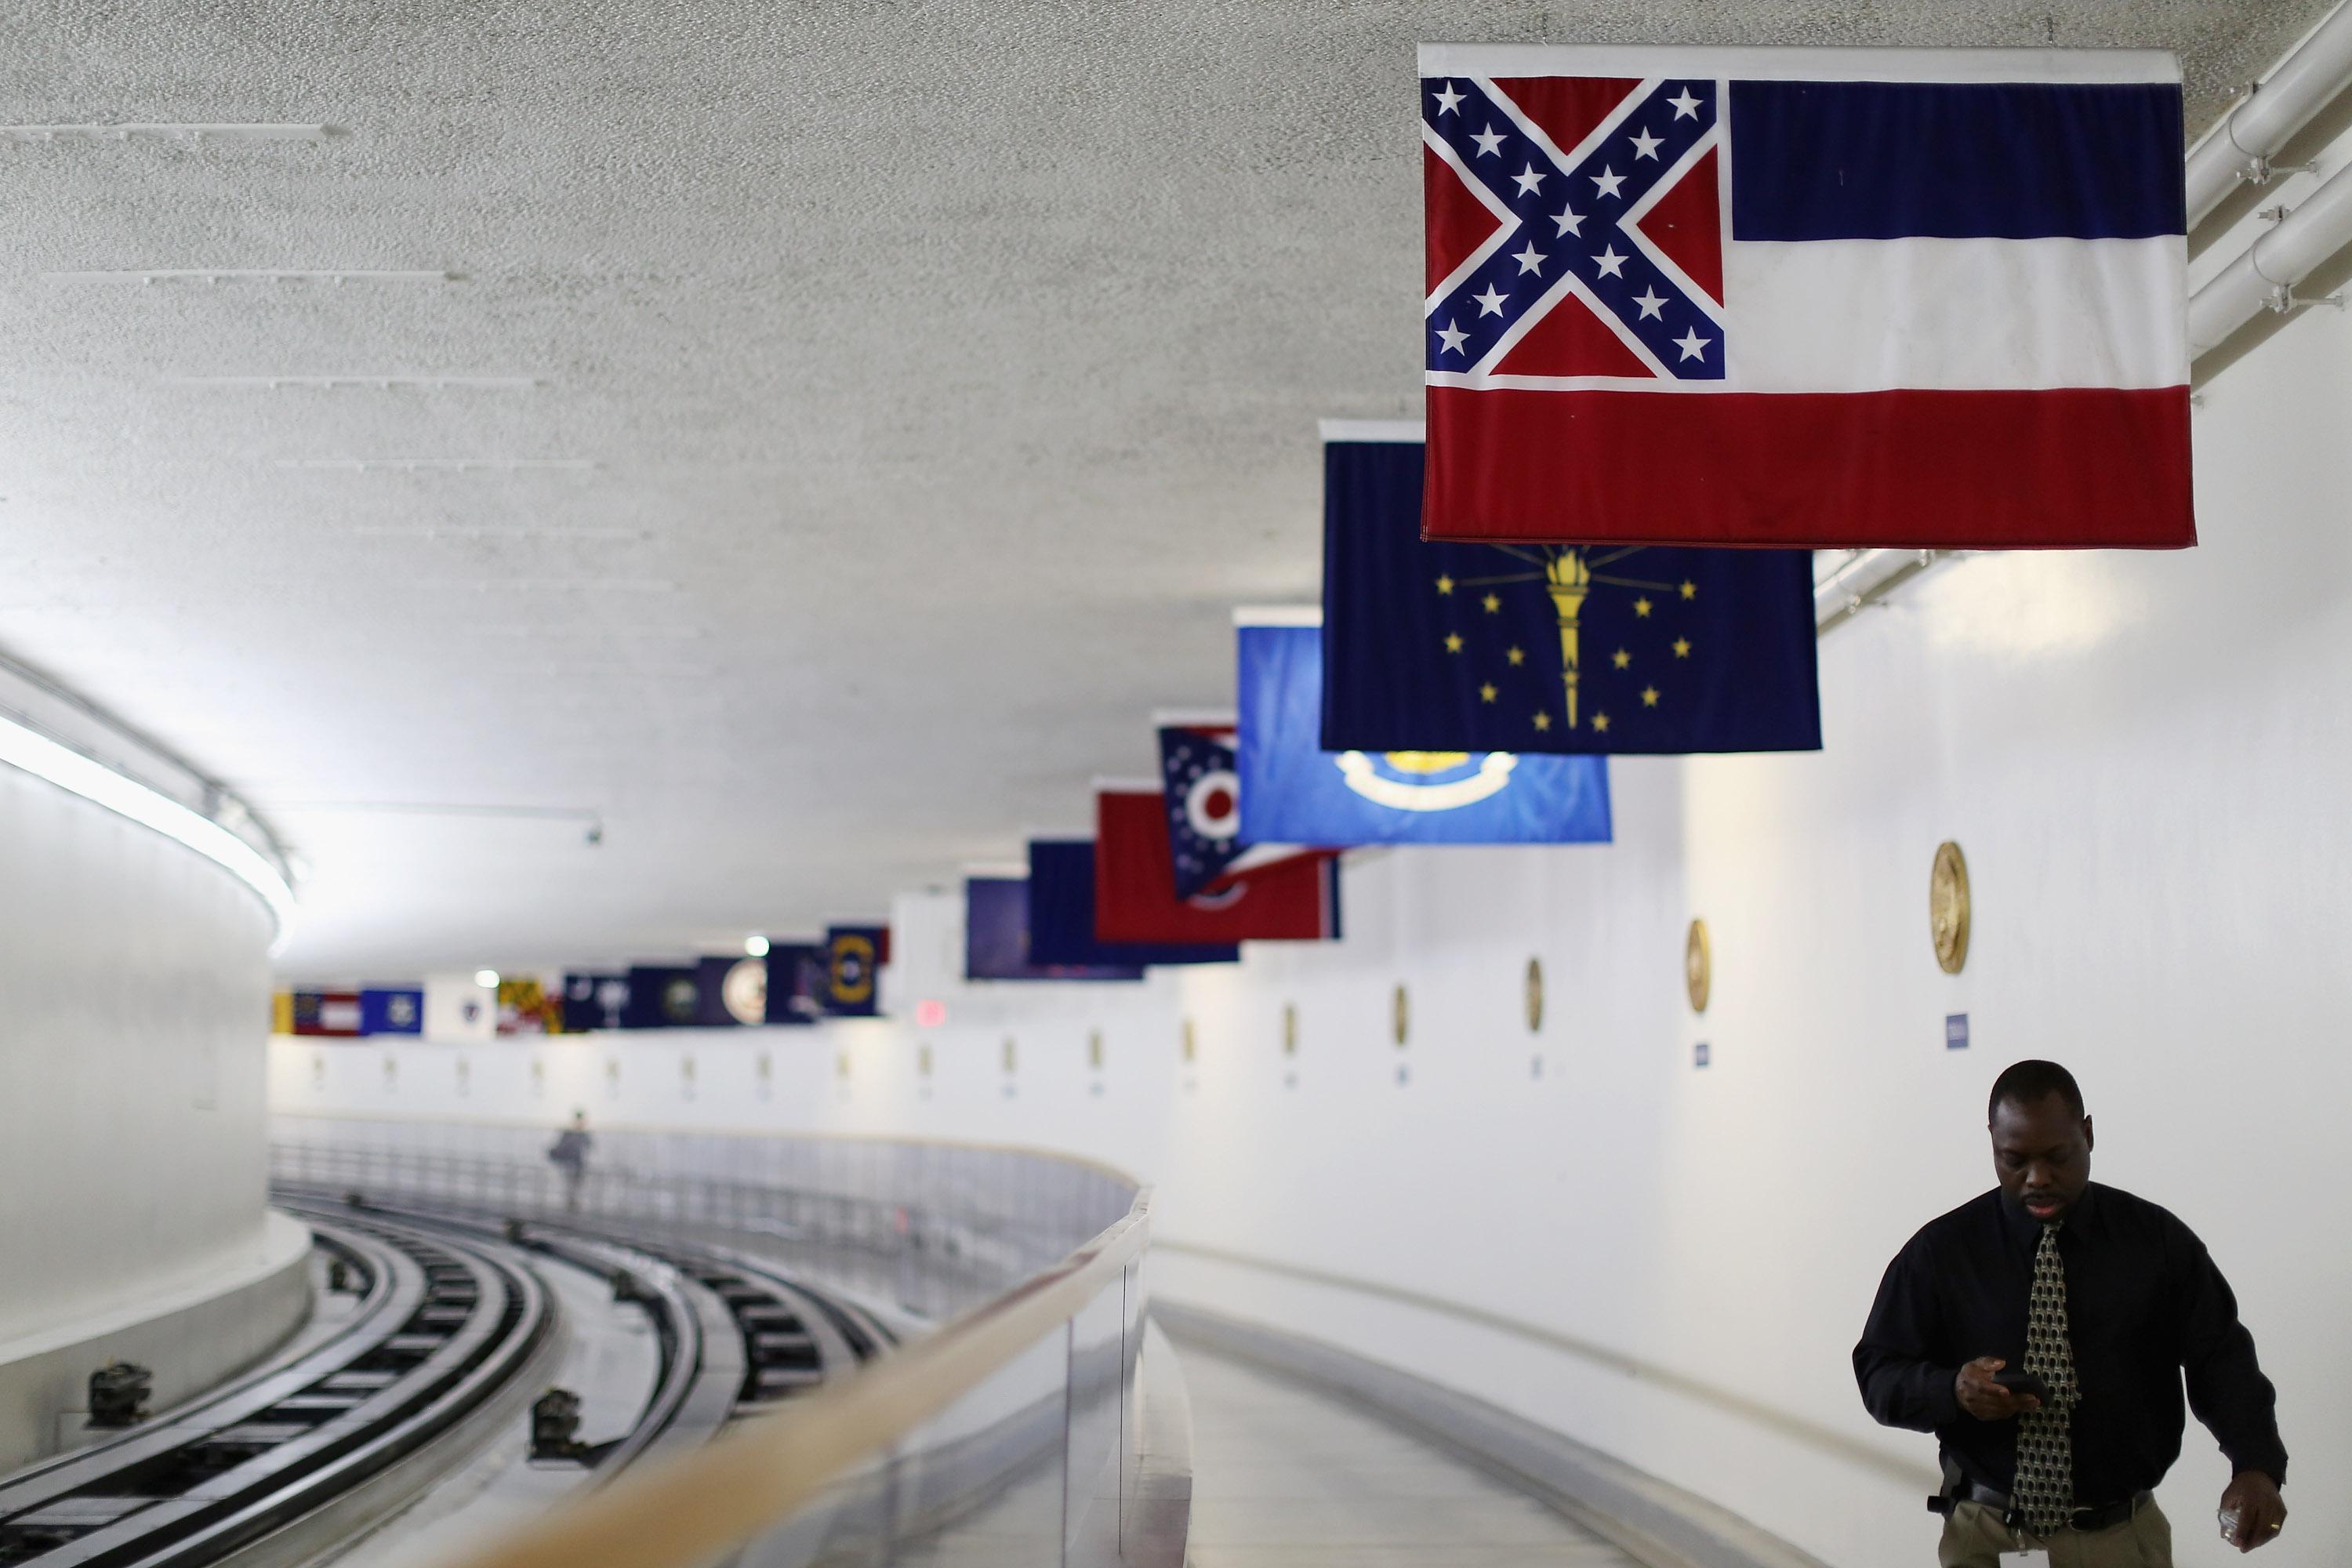 State and territory flags hang from the ceiling of the tunnel, with Mississippi's flag in front